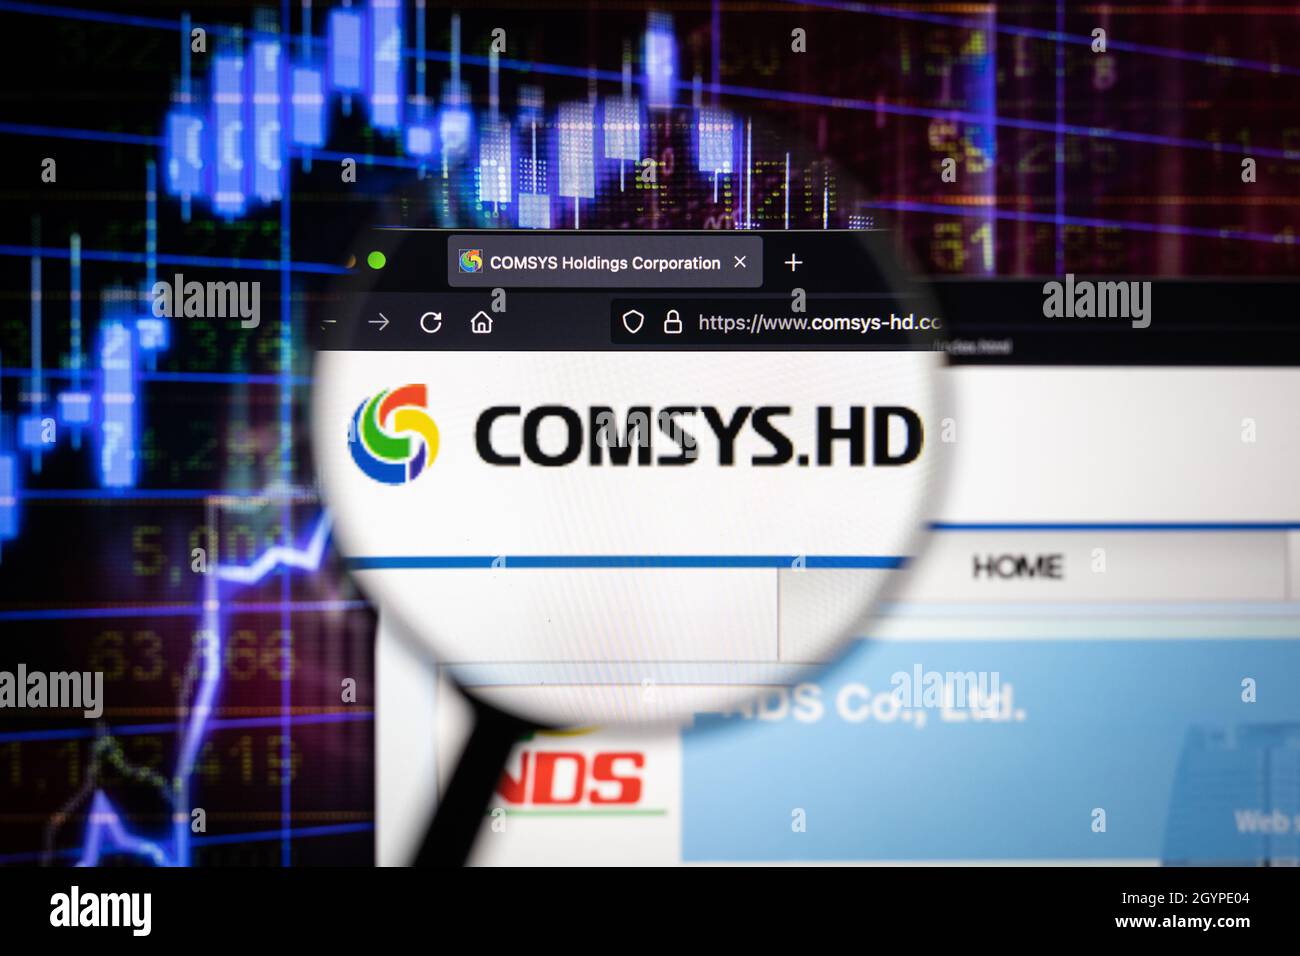 Comsys.HD company logo on a website with blurry stock market graphs in the background, seen on a computer screen through a magnifying glass. Stock Photo